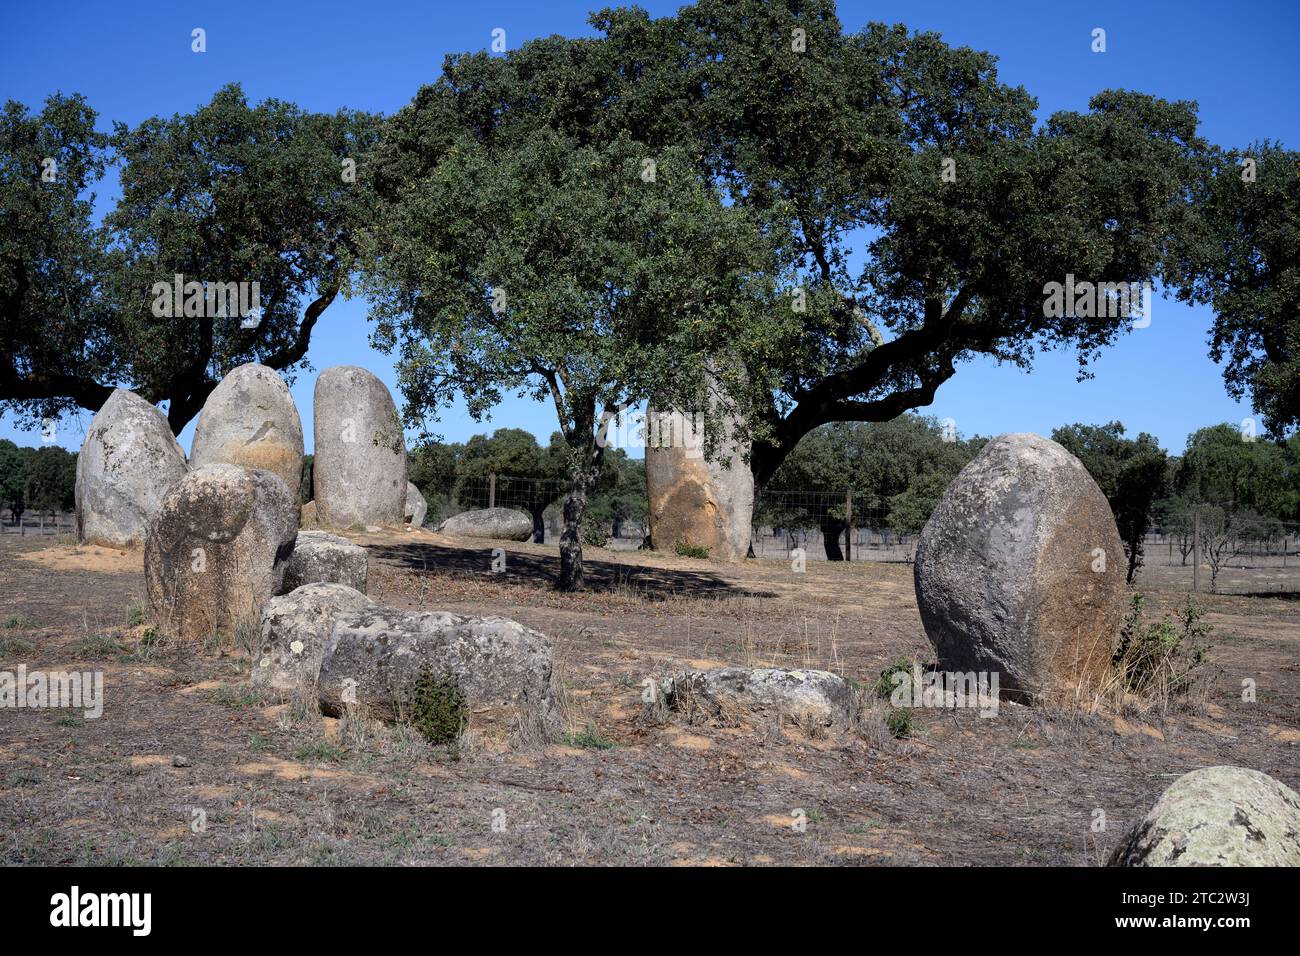 Cromeleque de Vale Maria do Meio The Vale Maria do Meio Cromlech is a megalithic stone circle situated in Évora district in the Alentejo region of Por Stock Photo